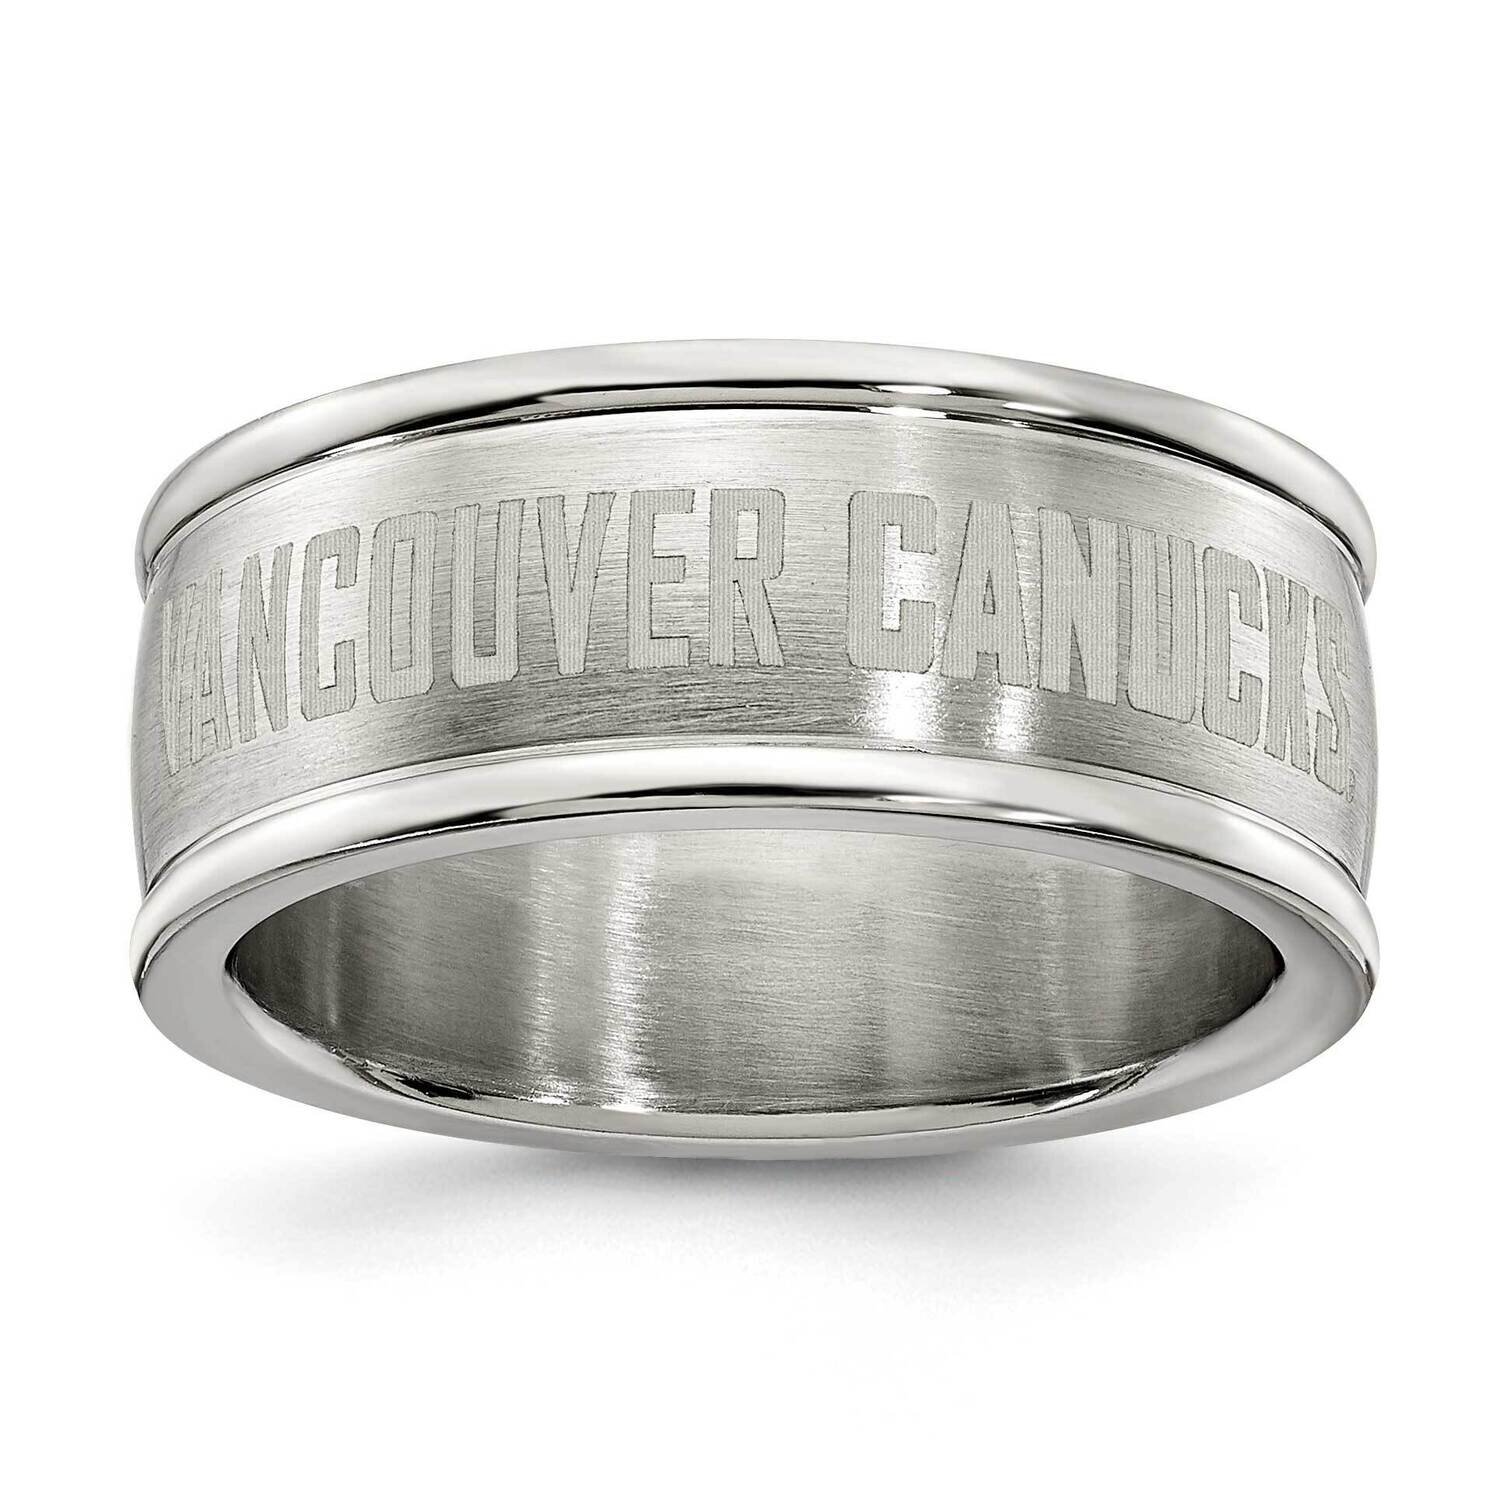 Vancouver Canucks Logo Band Ring Stainless Steel CUC035-SZ6